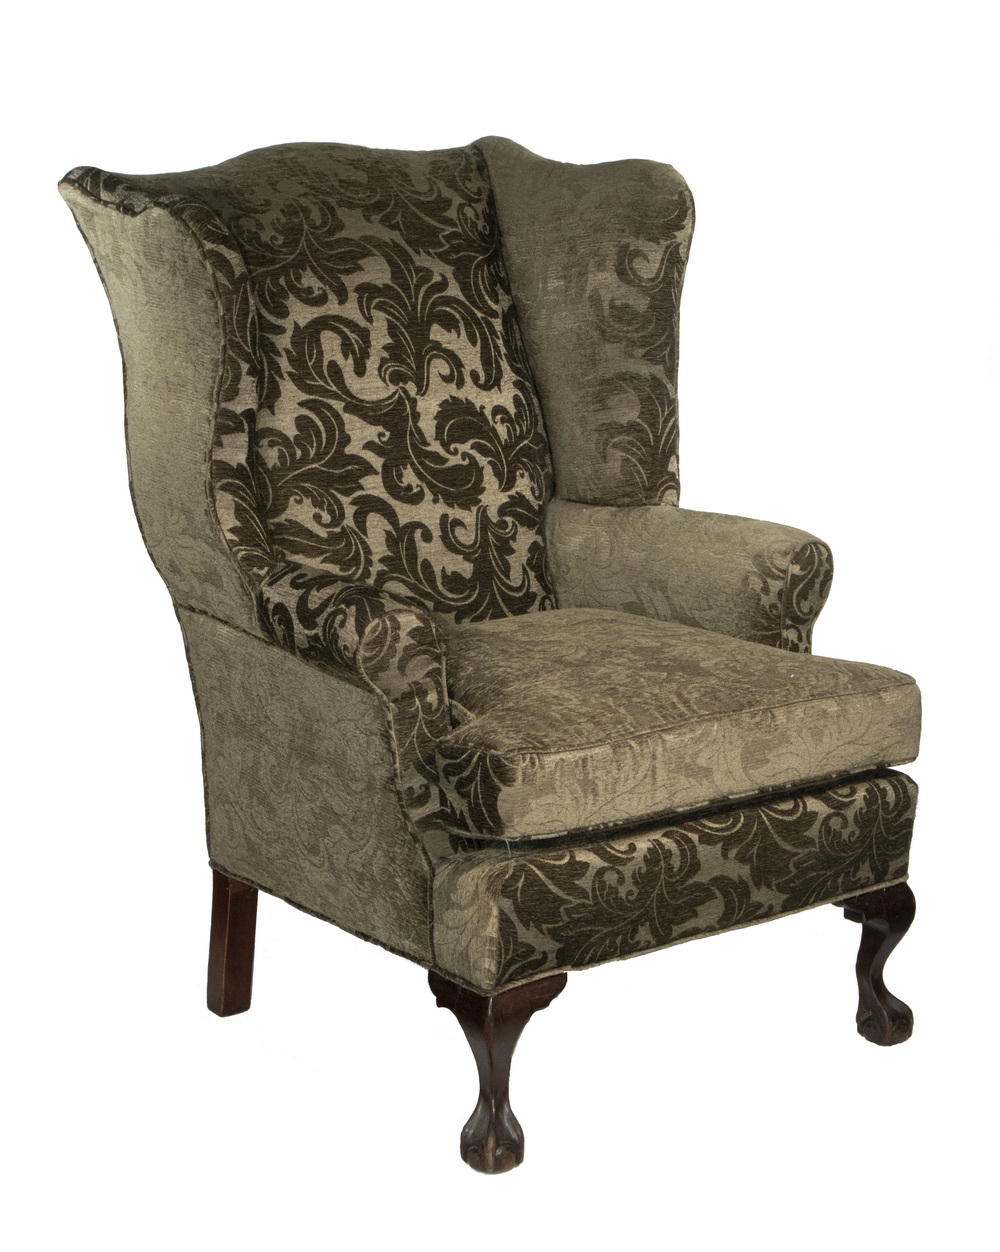 CUSTOM WING CHAIR Chippendale Style 2b3a36